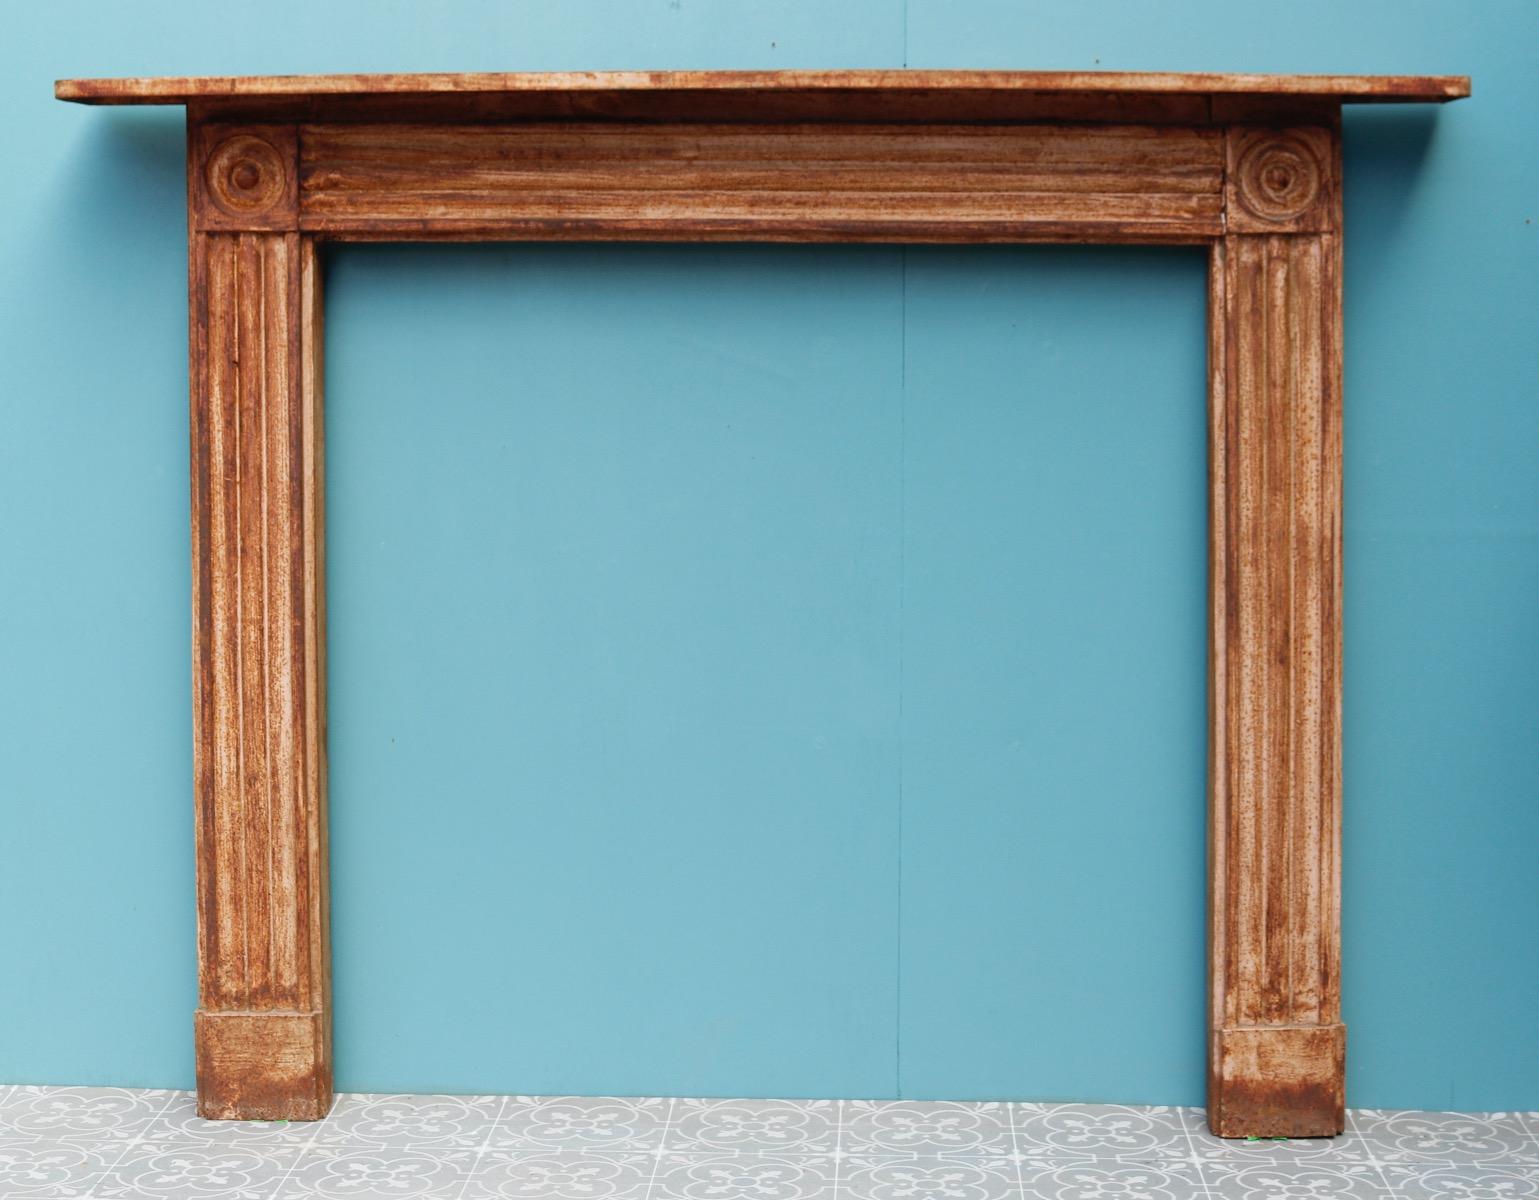 A reclaimed cast iron fire surround in the Georgian style with ‘bullseye’ corner blocks.

Additional dimensions 

Opening height 102 cm

Opening width 102.5 cm

Width between outsides of the foot blocks 134 cm.